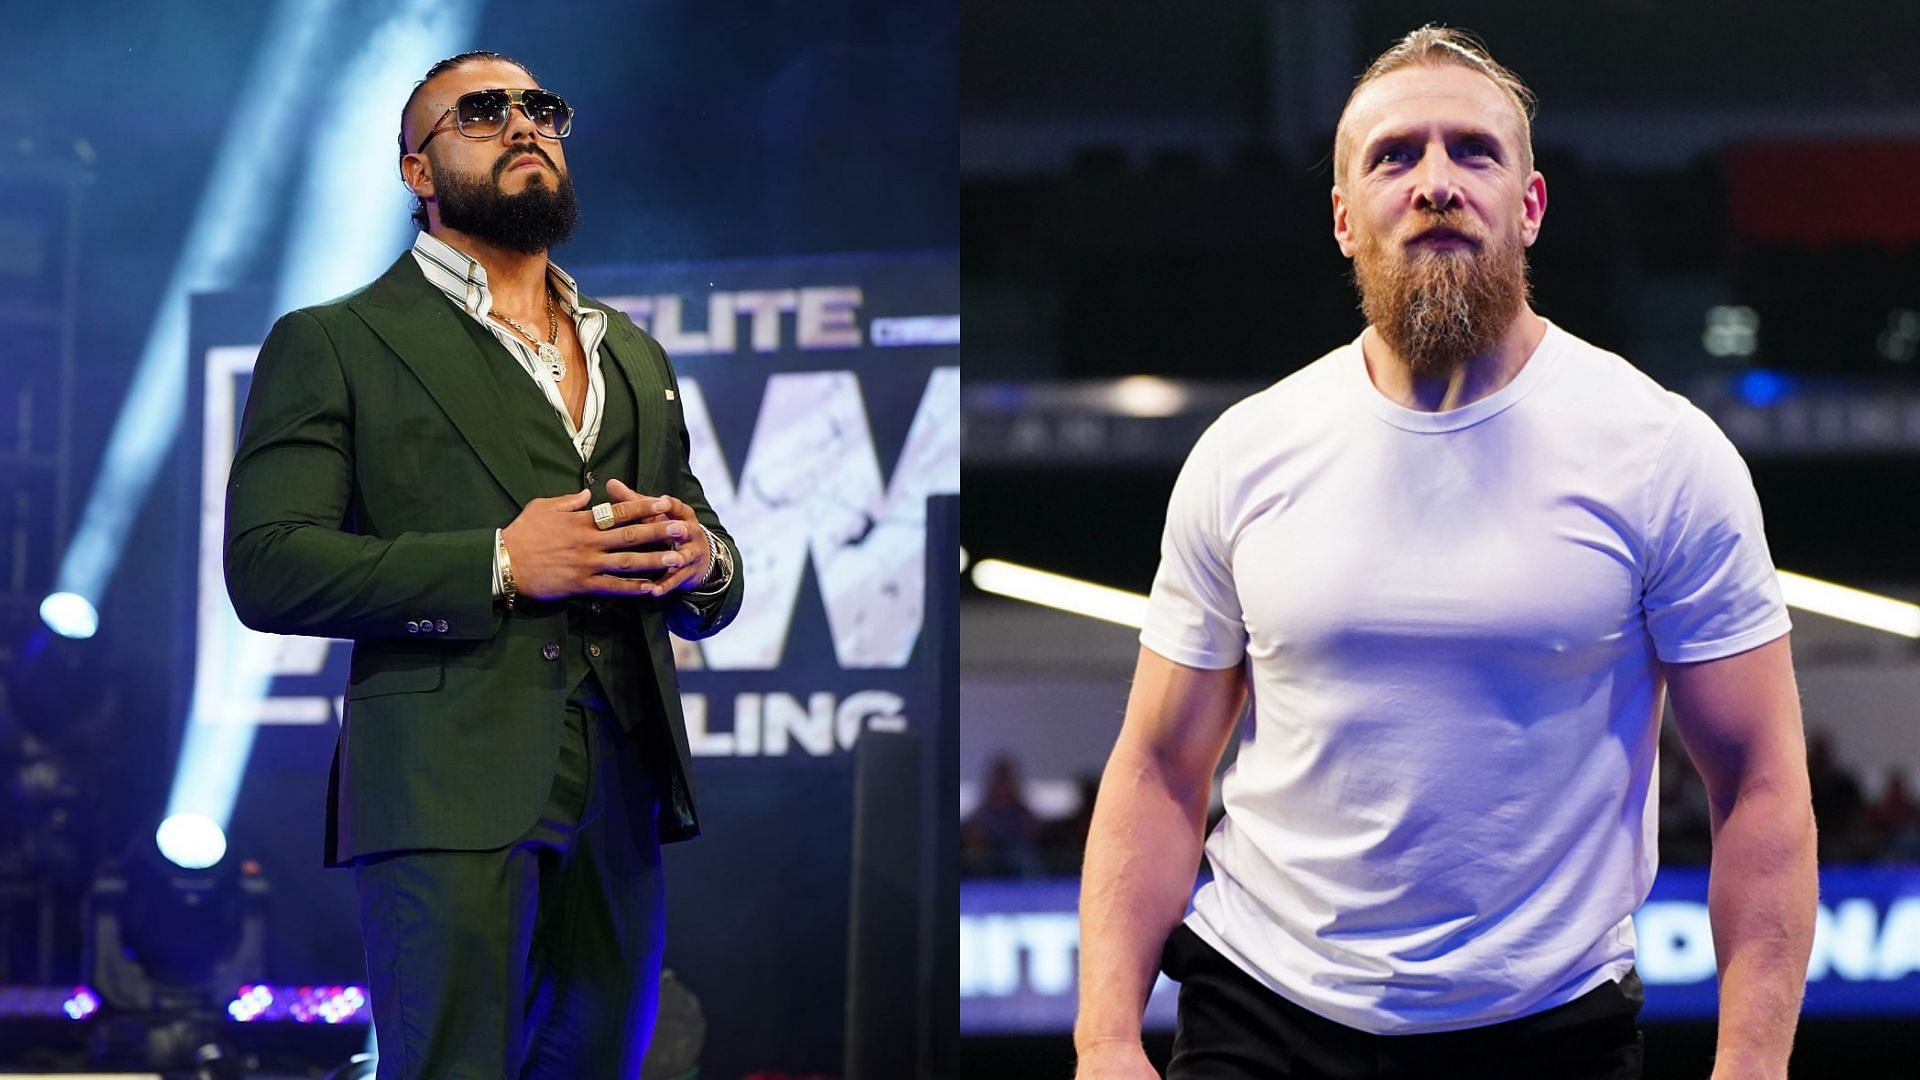 Whose career has benefitted from joining AEW?